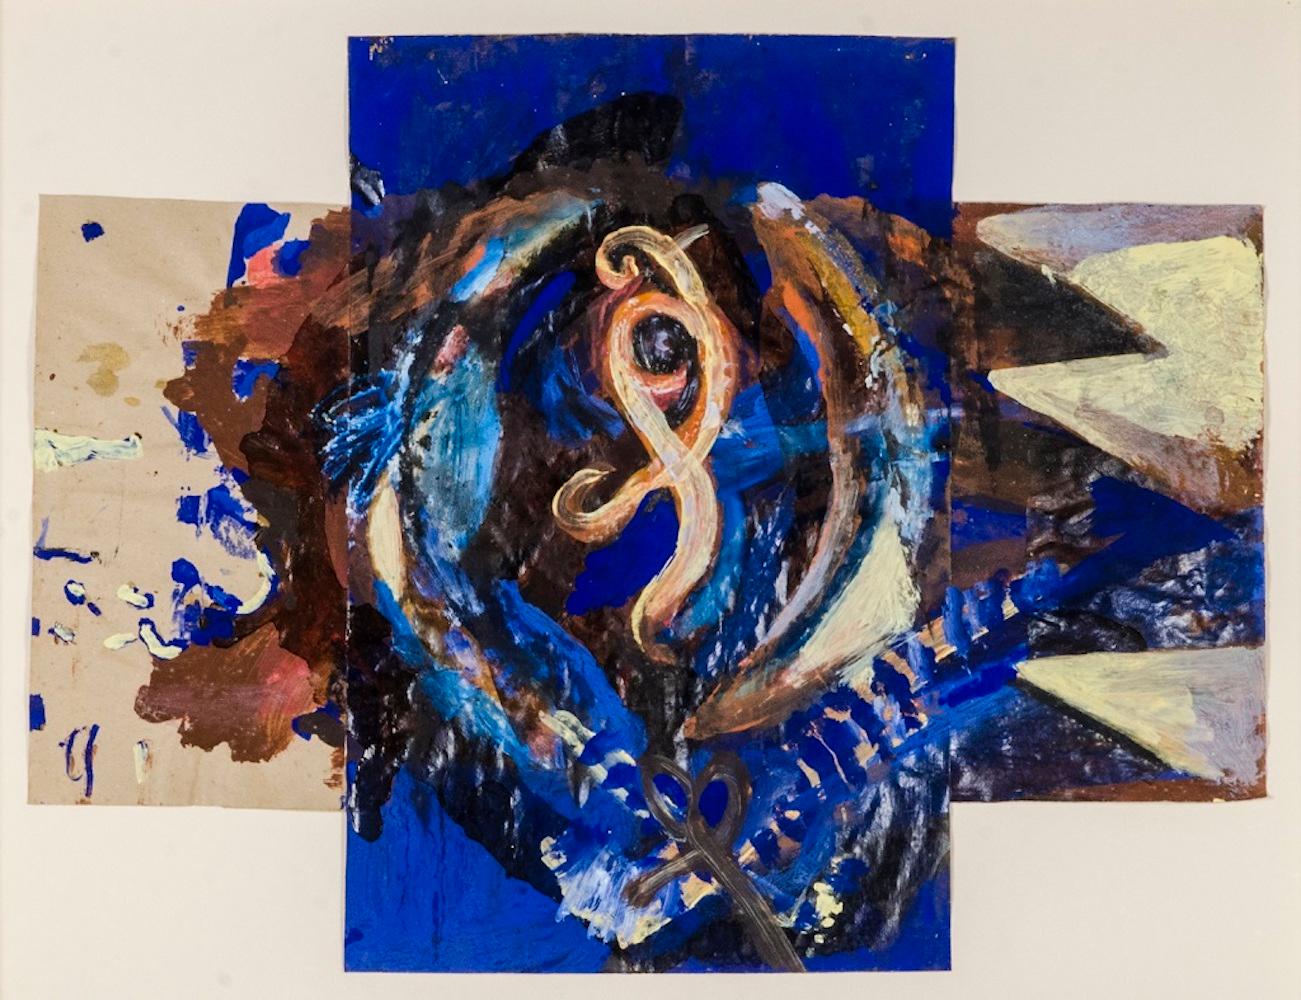 Untitled is a mixed media artwork realized by Bruno Ceccobelli (1952) in 1989. 

Mixed media and collage on paper,.

Exhibition: Bruno Ceccobelli Personale, Galleria Il Millennio, RomE 1989

Photo-Certificate of Authenticity by the Artist, November